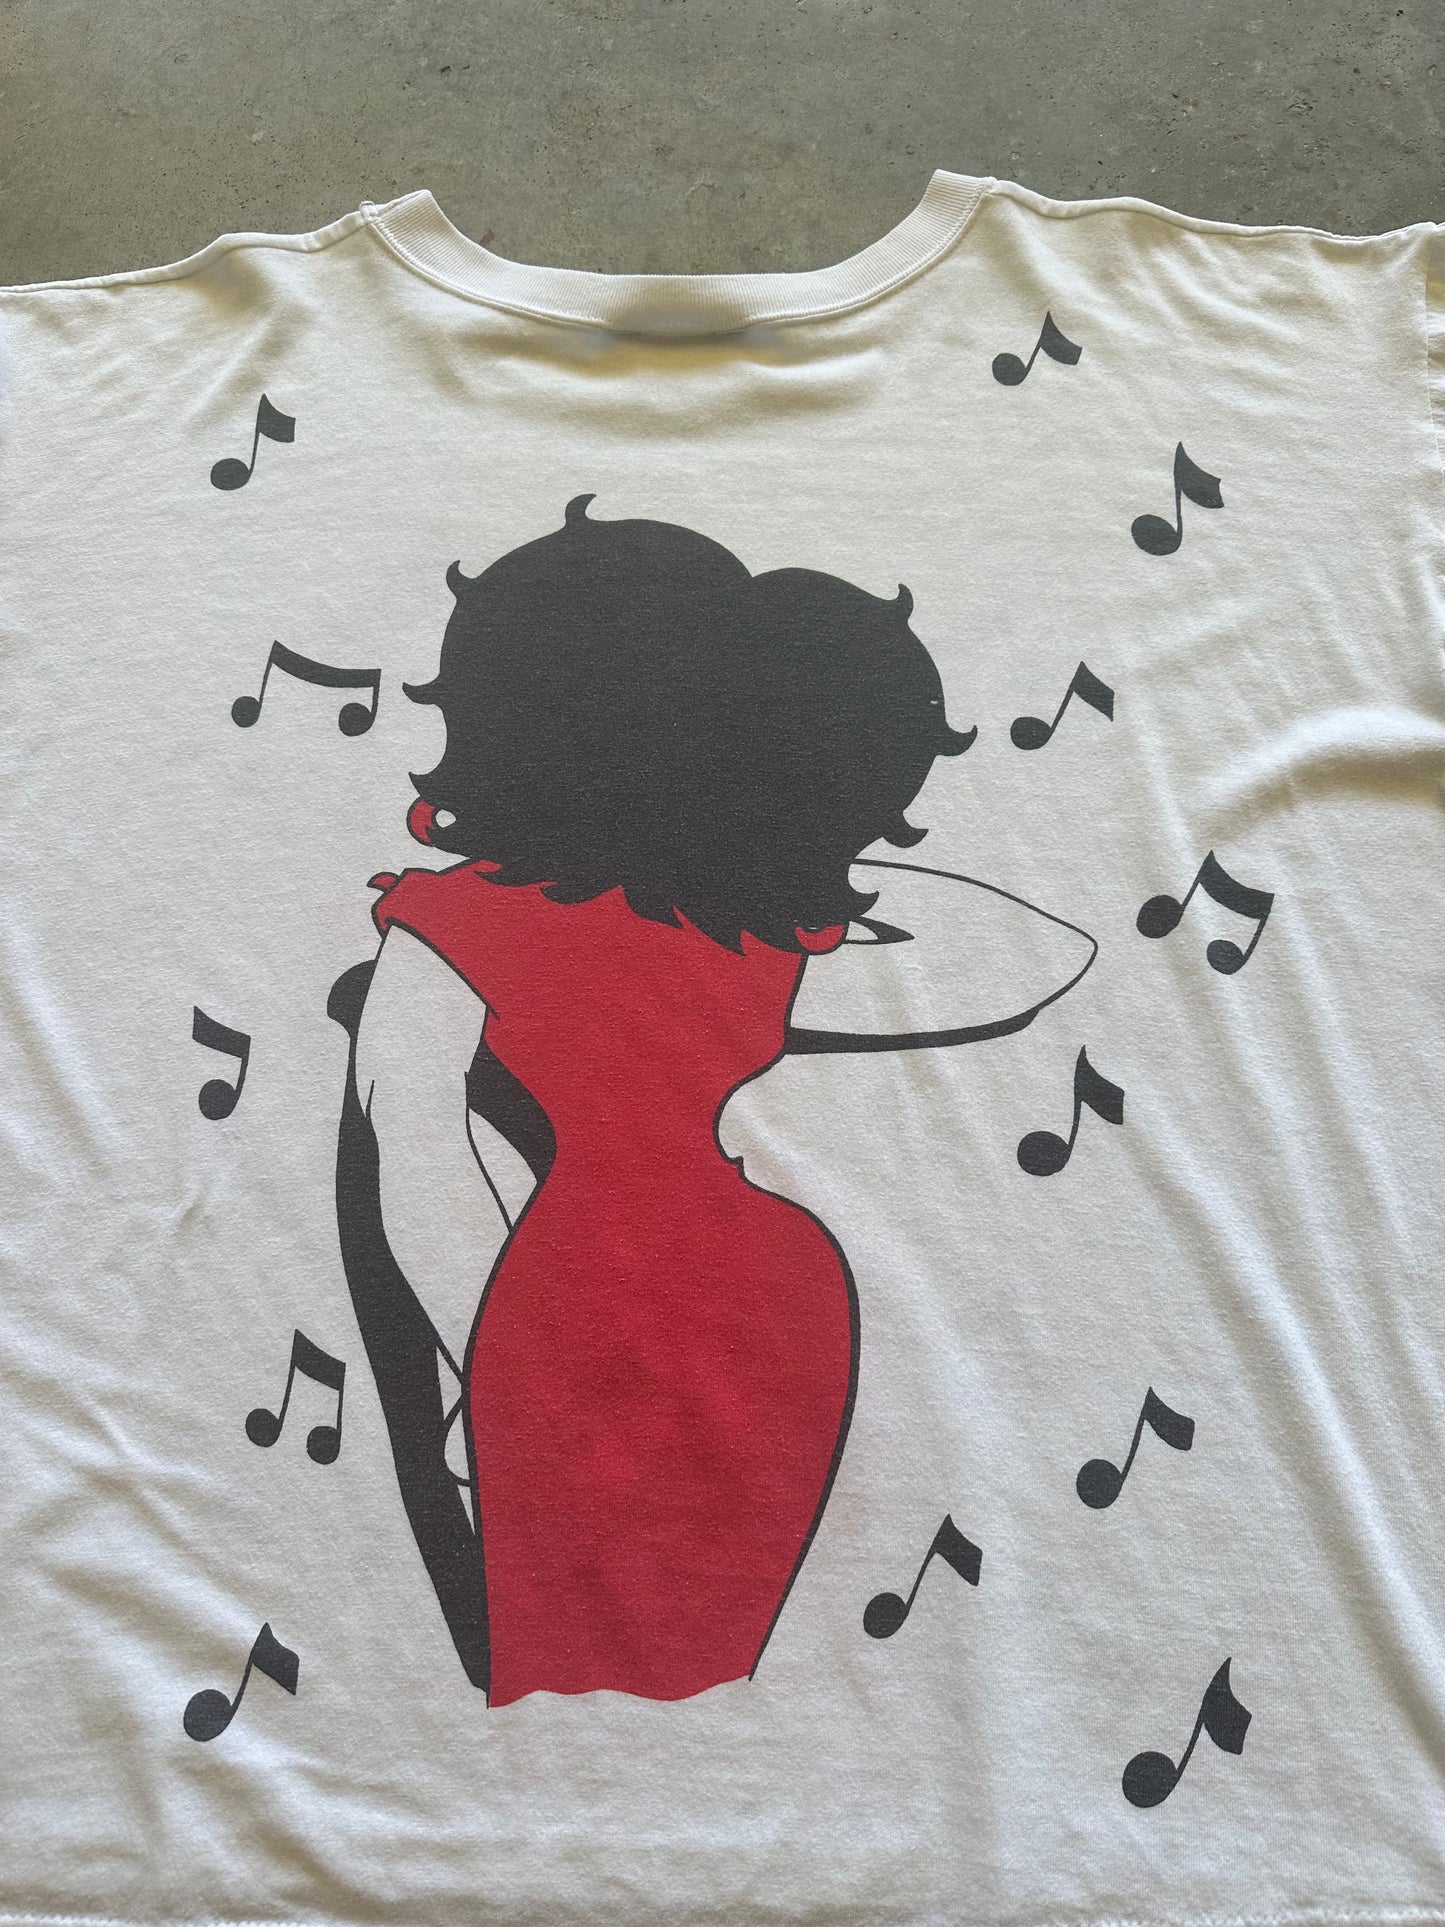 (XL) 1993 Betty Boop 'I Wanna Be Loved By You' Tee